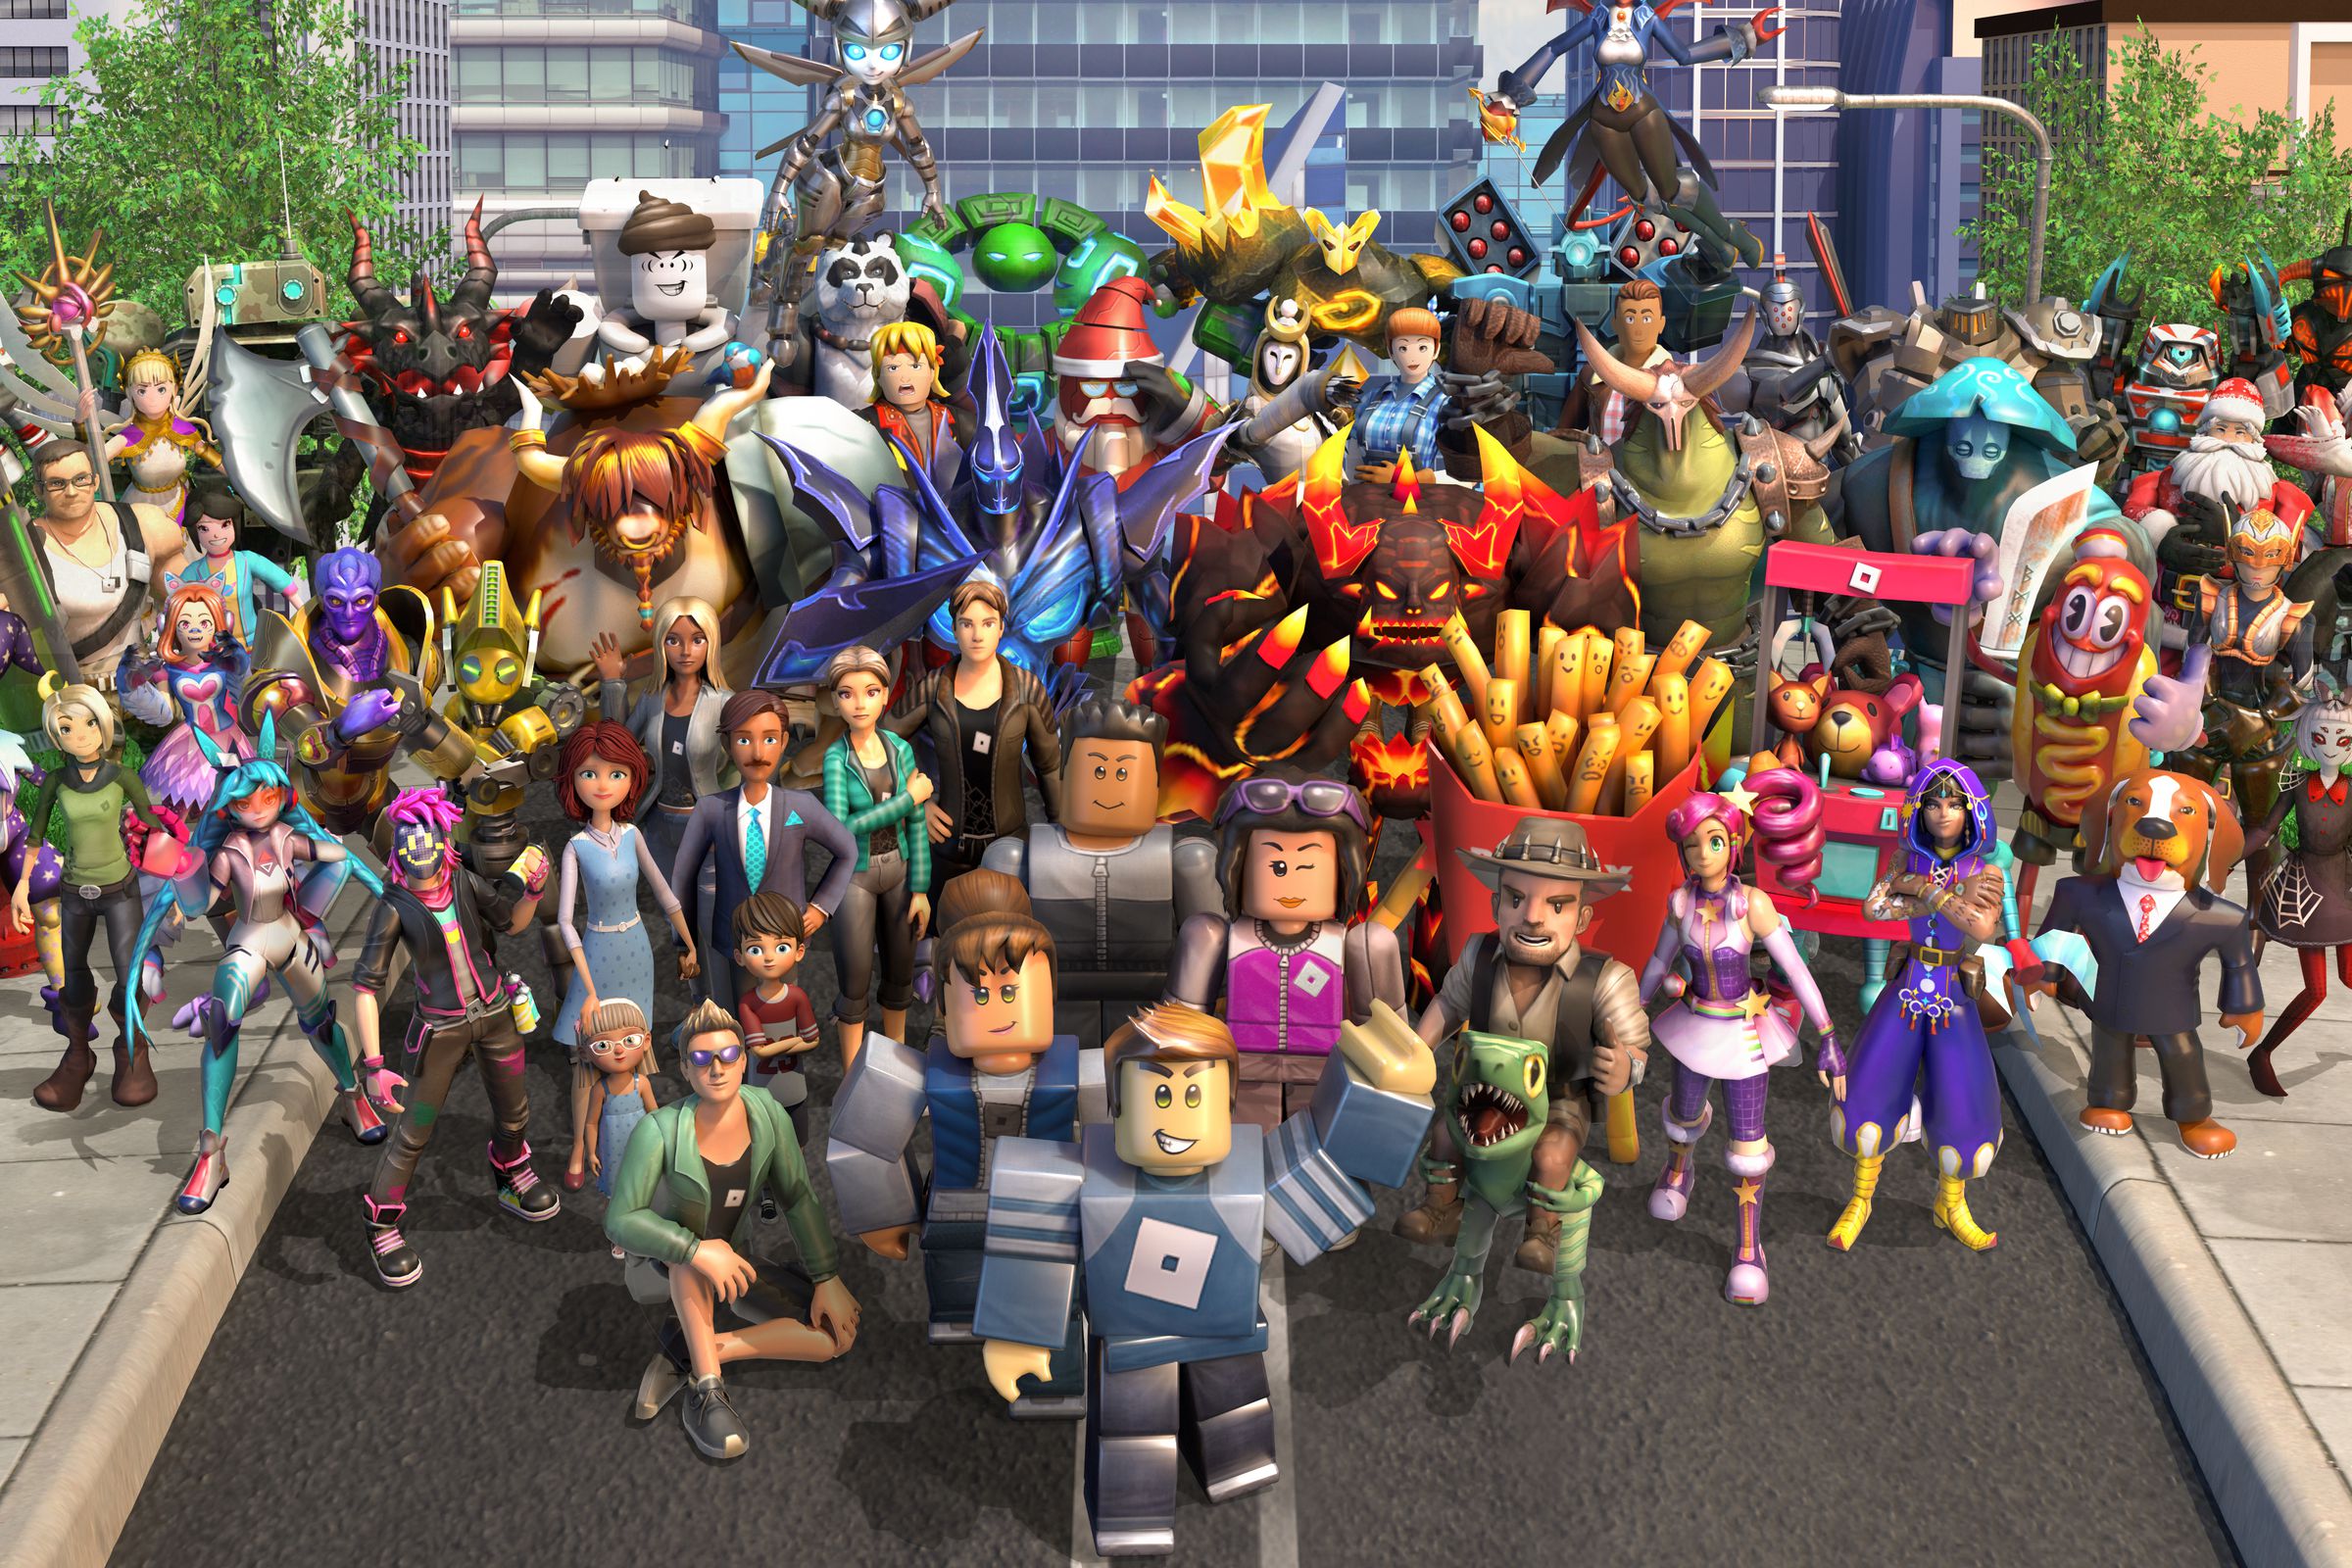 A Roblox promotional image featuring many different characters.